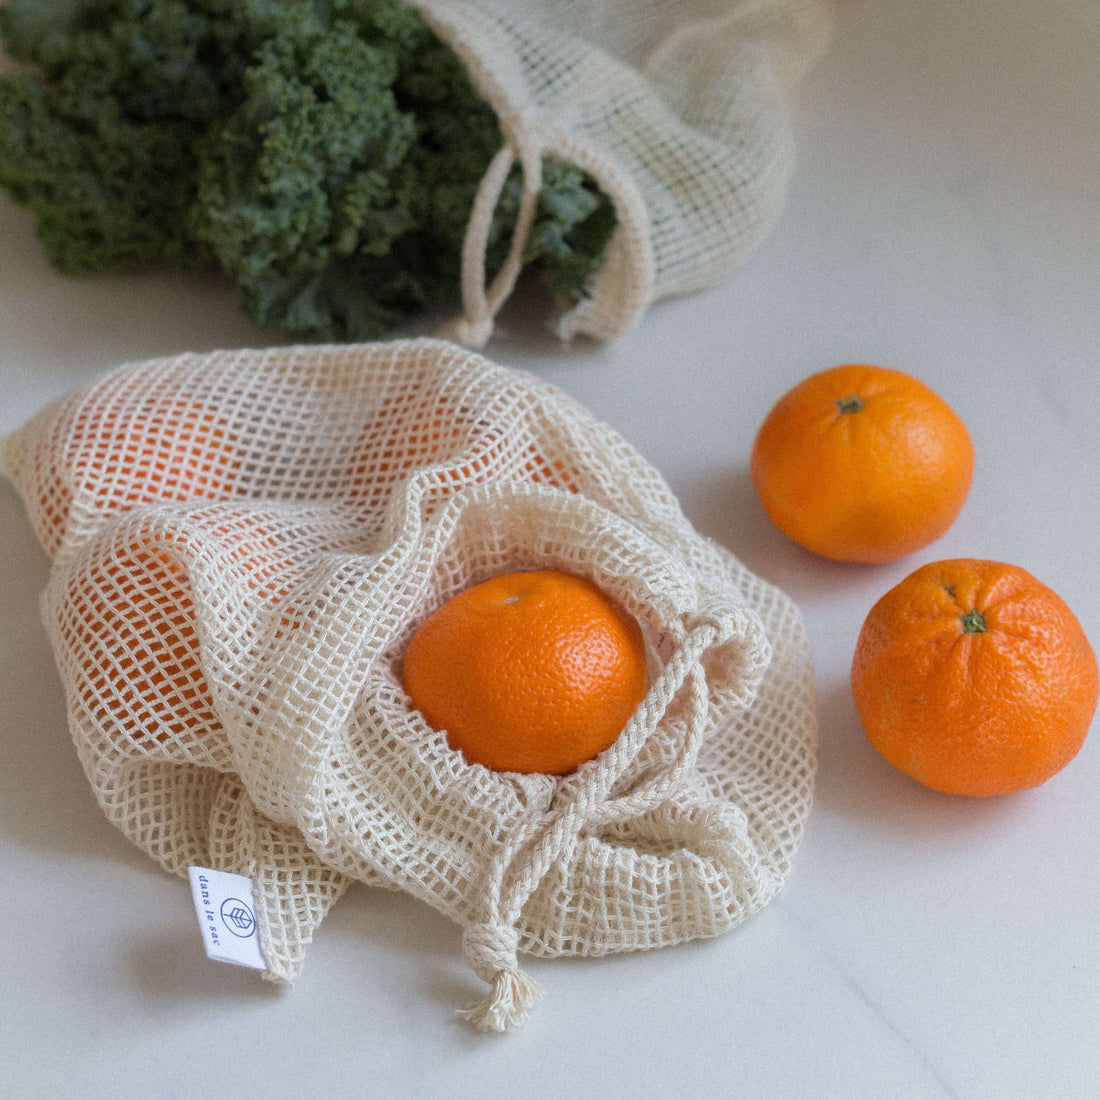 mesh bag cotton for fruits and veggies made in quebec